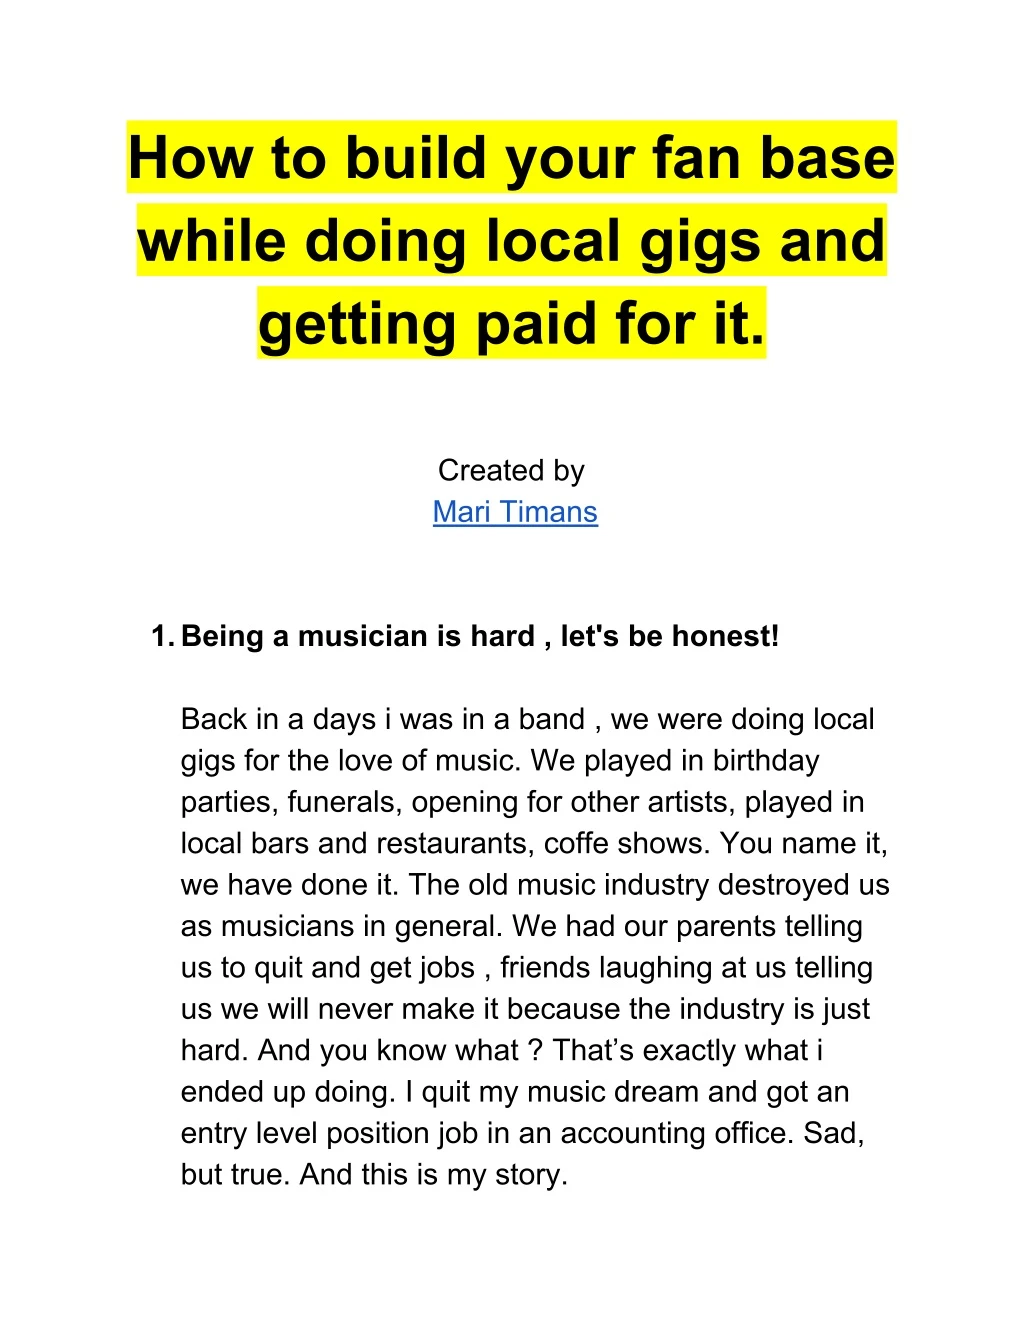 how to build your fan base while doing local gigs